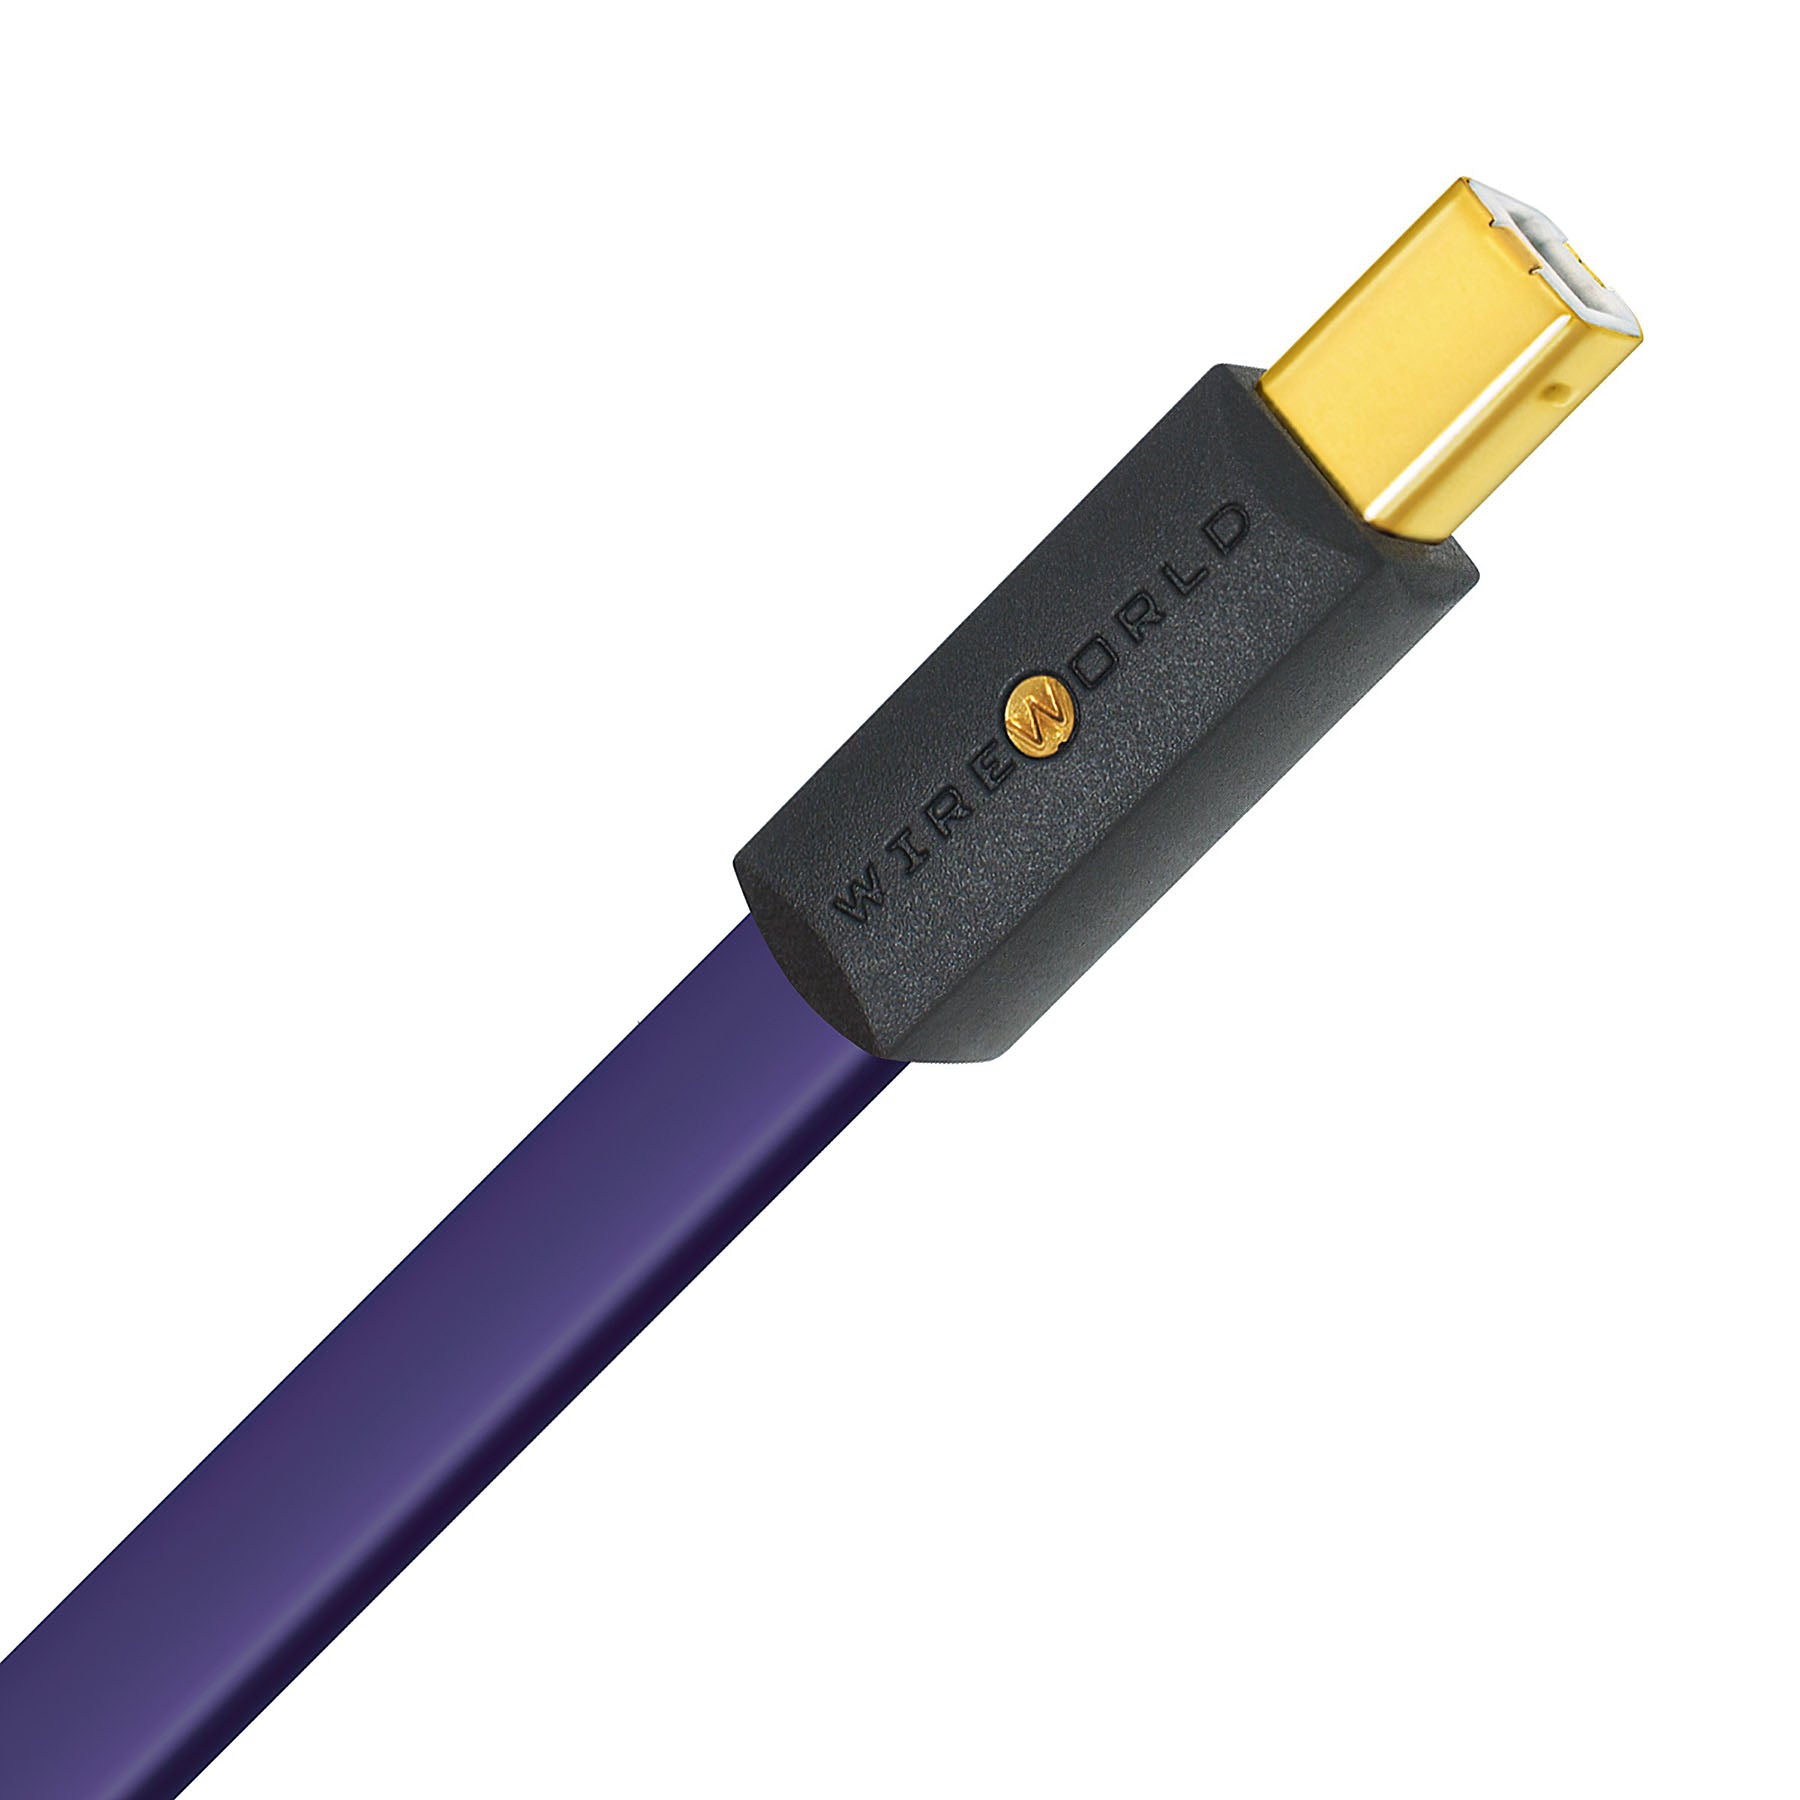 Wireworld Ultraviolet™ 8 USB 2.0 Audio Cables